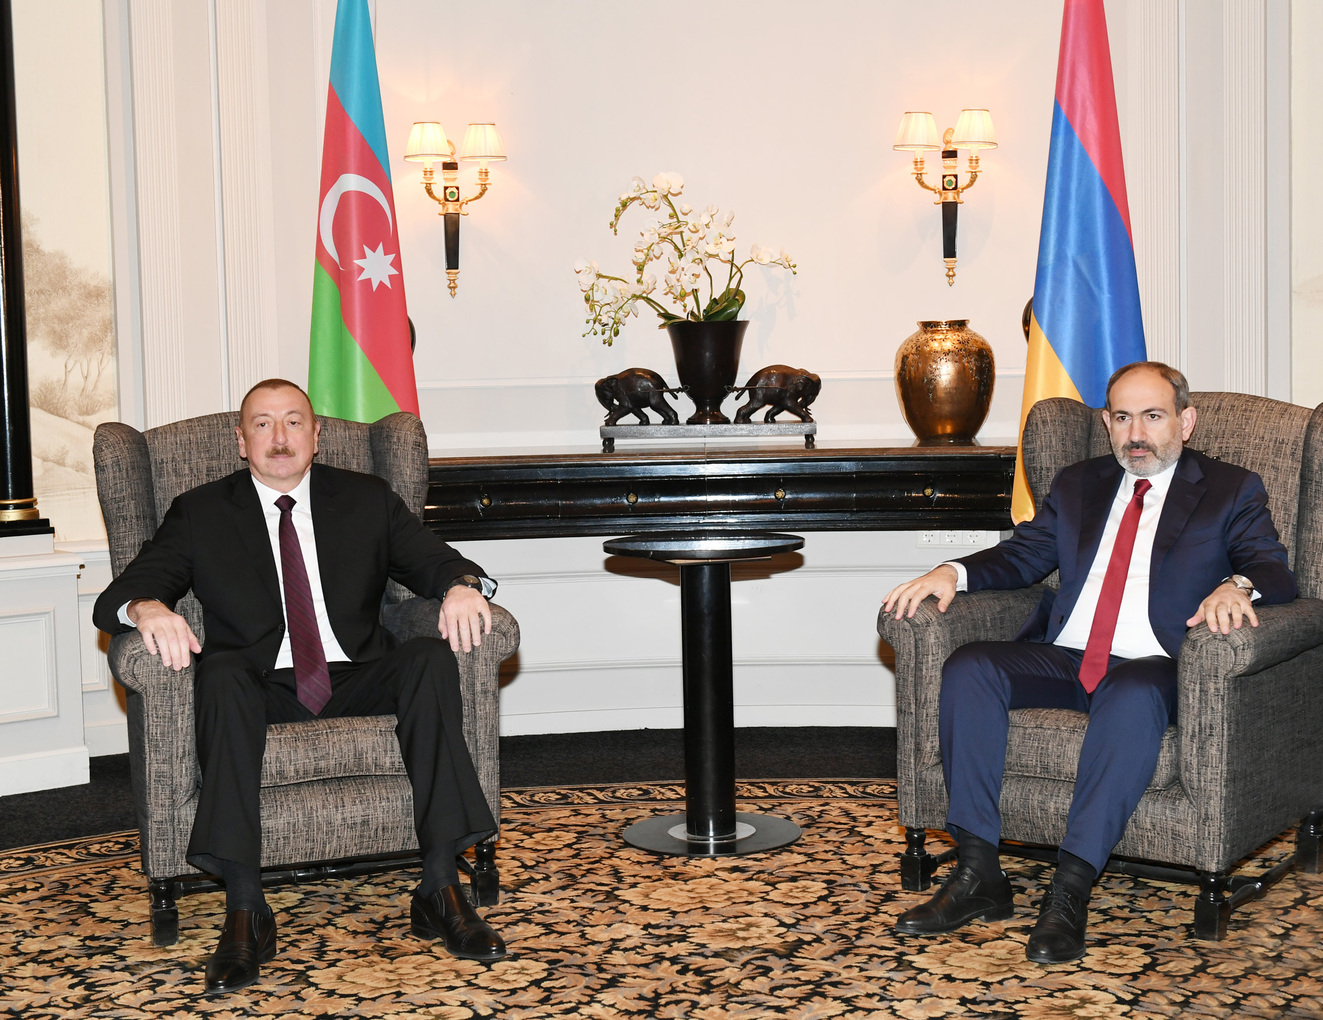 After meeting between Aliyev and Pashinyan in Vienna: Peace or War?